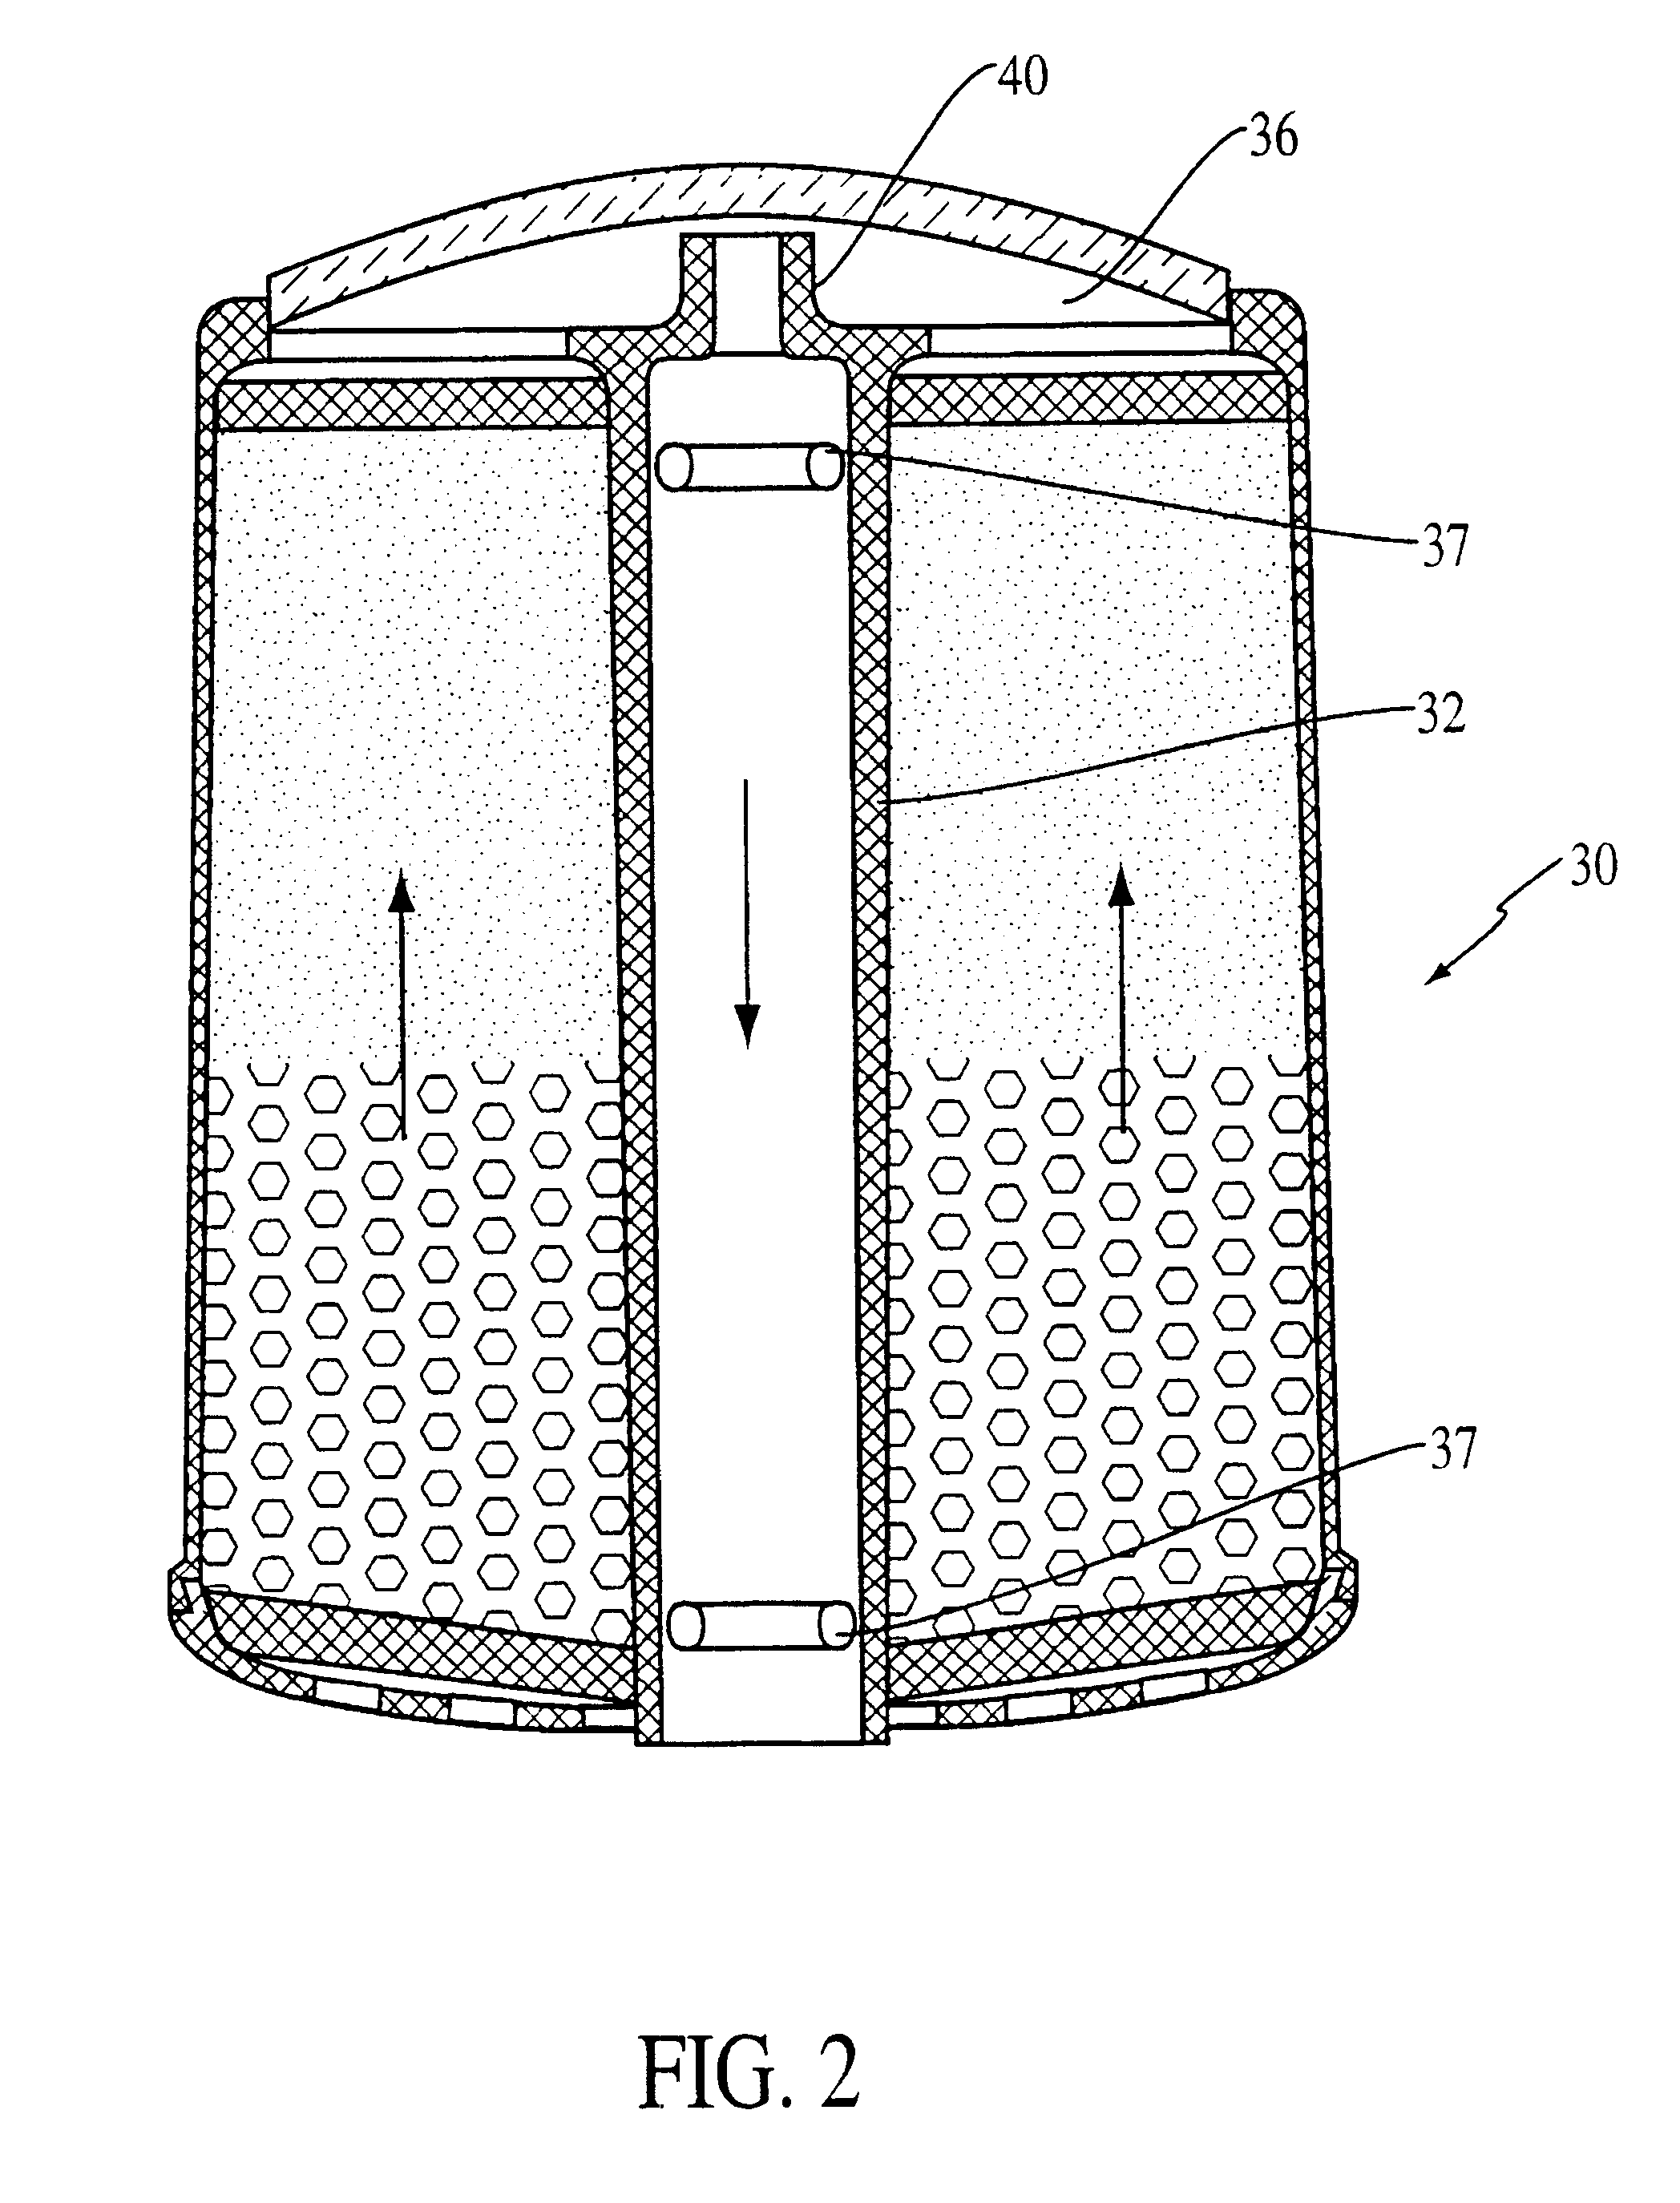 Filtration device for liquid purification